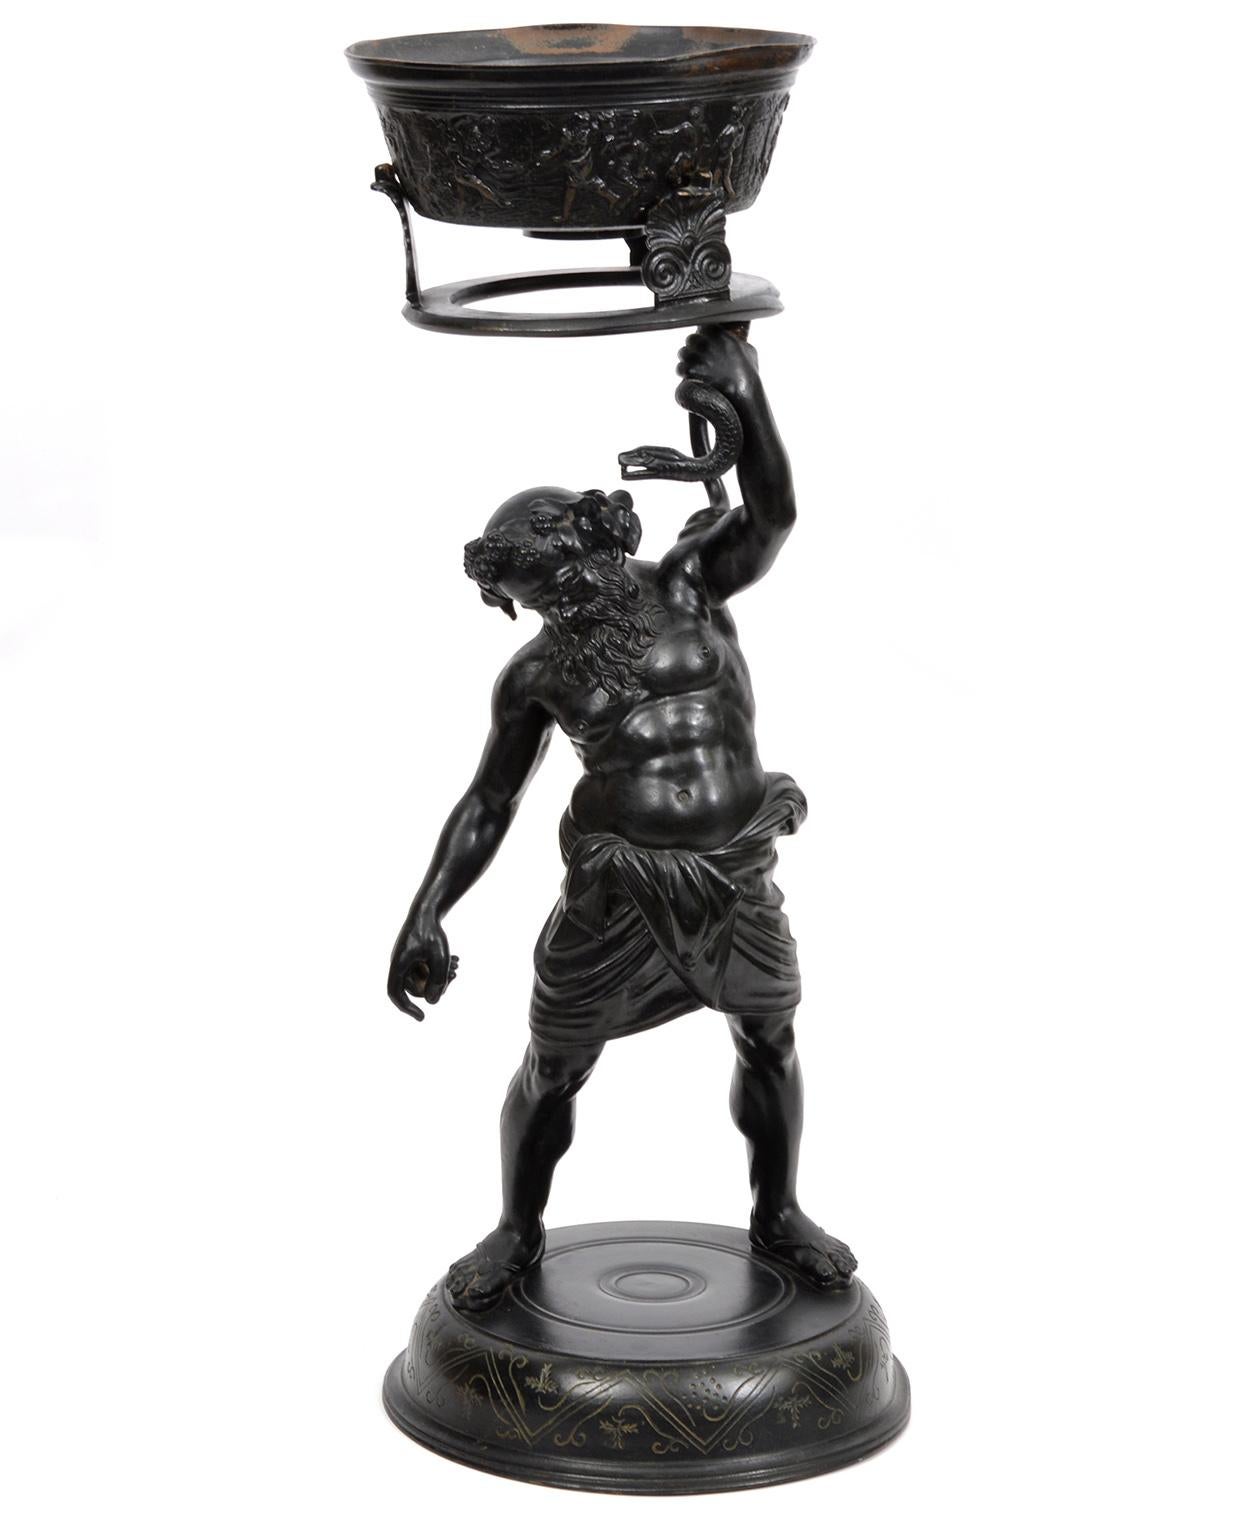 Standing 26 inches tall this two part Italian Grand Tour patinated bronze statue depicts Silenius, the Roman good of wine, holding up a snake footed ceremonial vessel. It is unusual to find this statue with the accompanying vessel which in this case